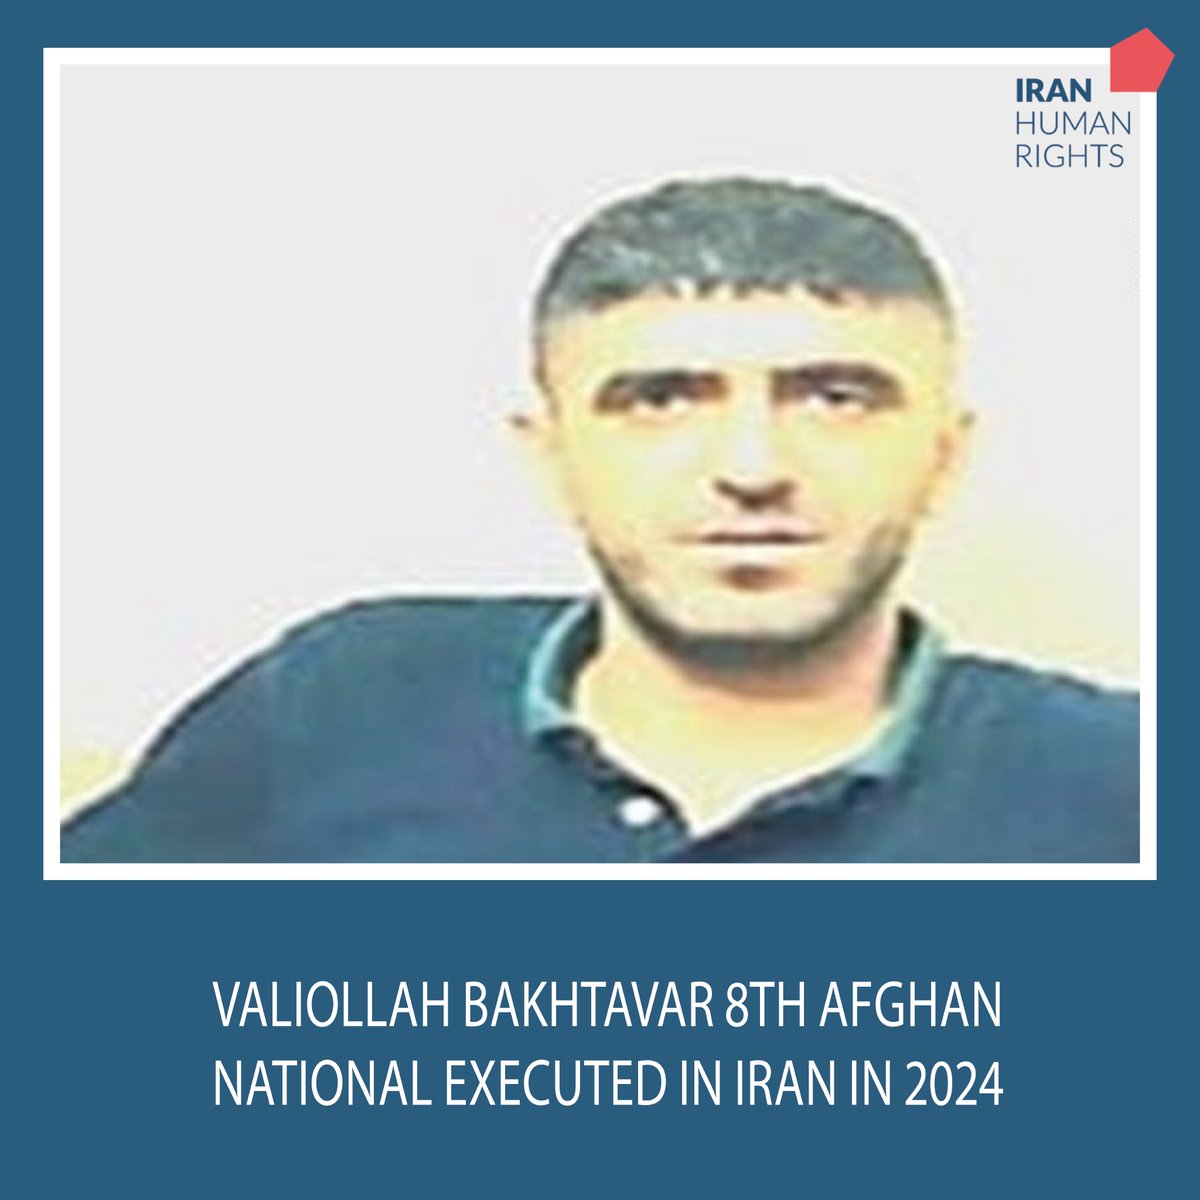 #Iran: Valiollah Bakhtavar, a 33-year-old Afghan man from Bagram in Afghanistan, was executed for murder charges in in Tabriz Central Prison on 17th April. Per IHRNGO sources, 'He worked at a fruit stall and had got into an altercation with his boss because they didn’t pay him,